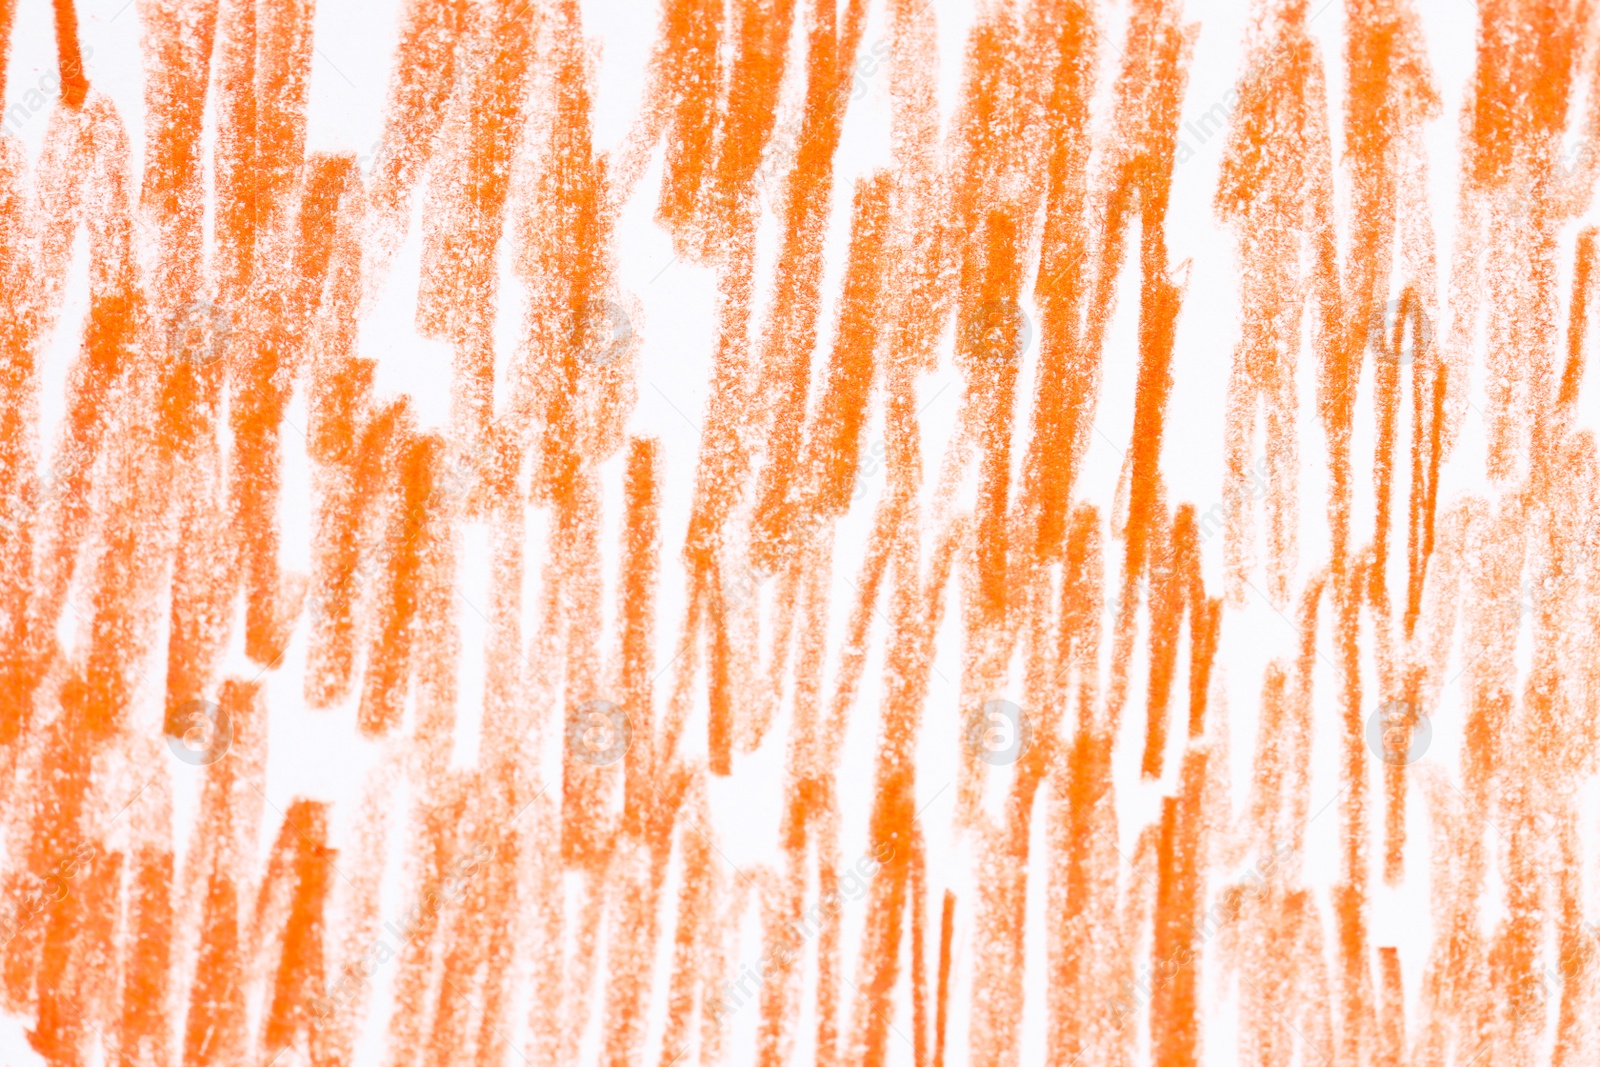 Photo of Orange pencil hatching as background, top view